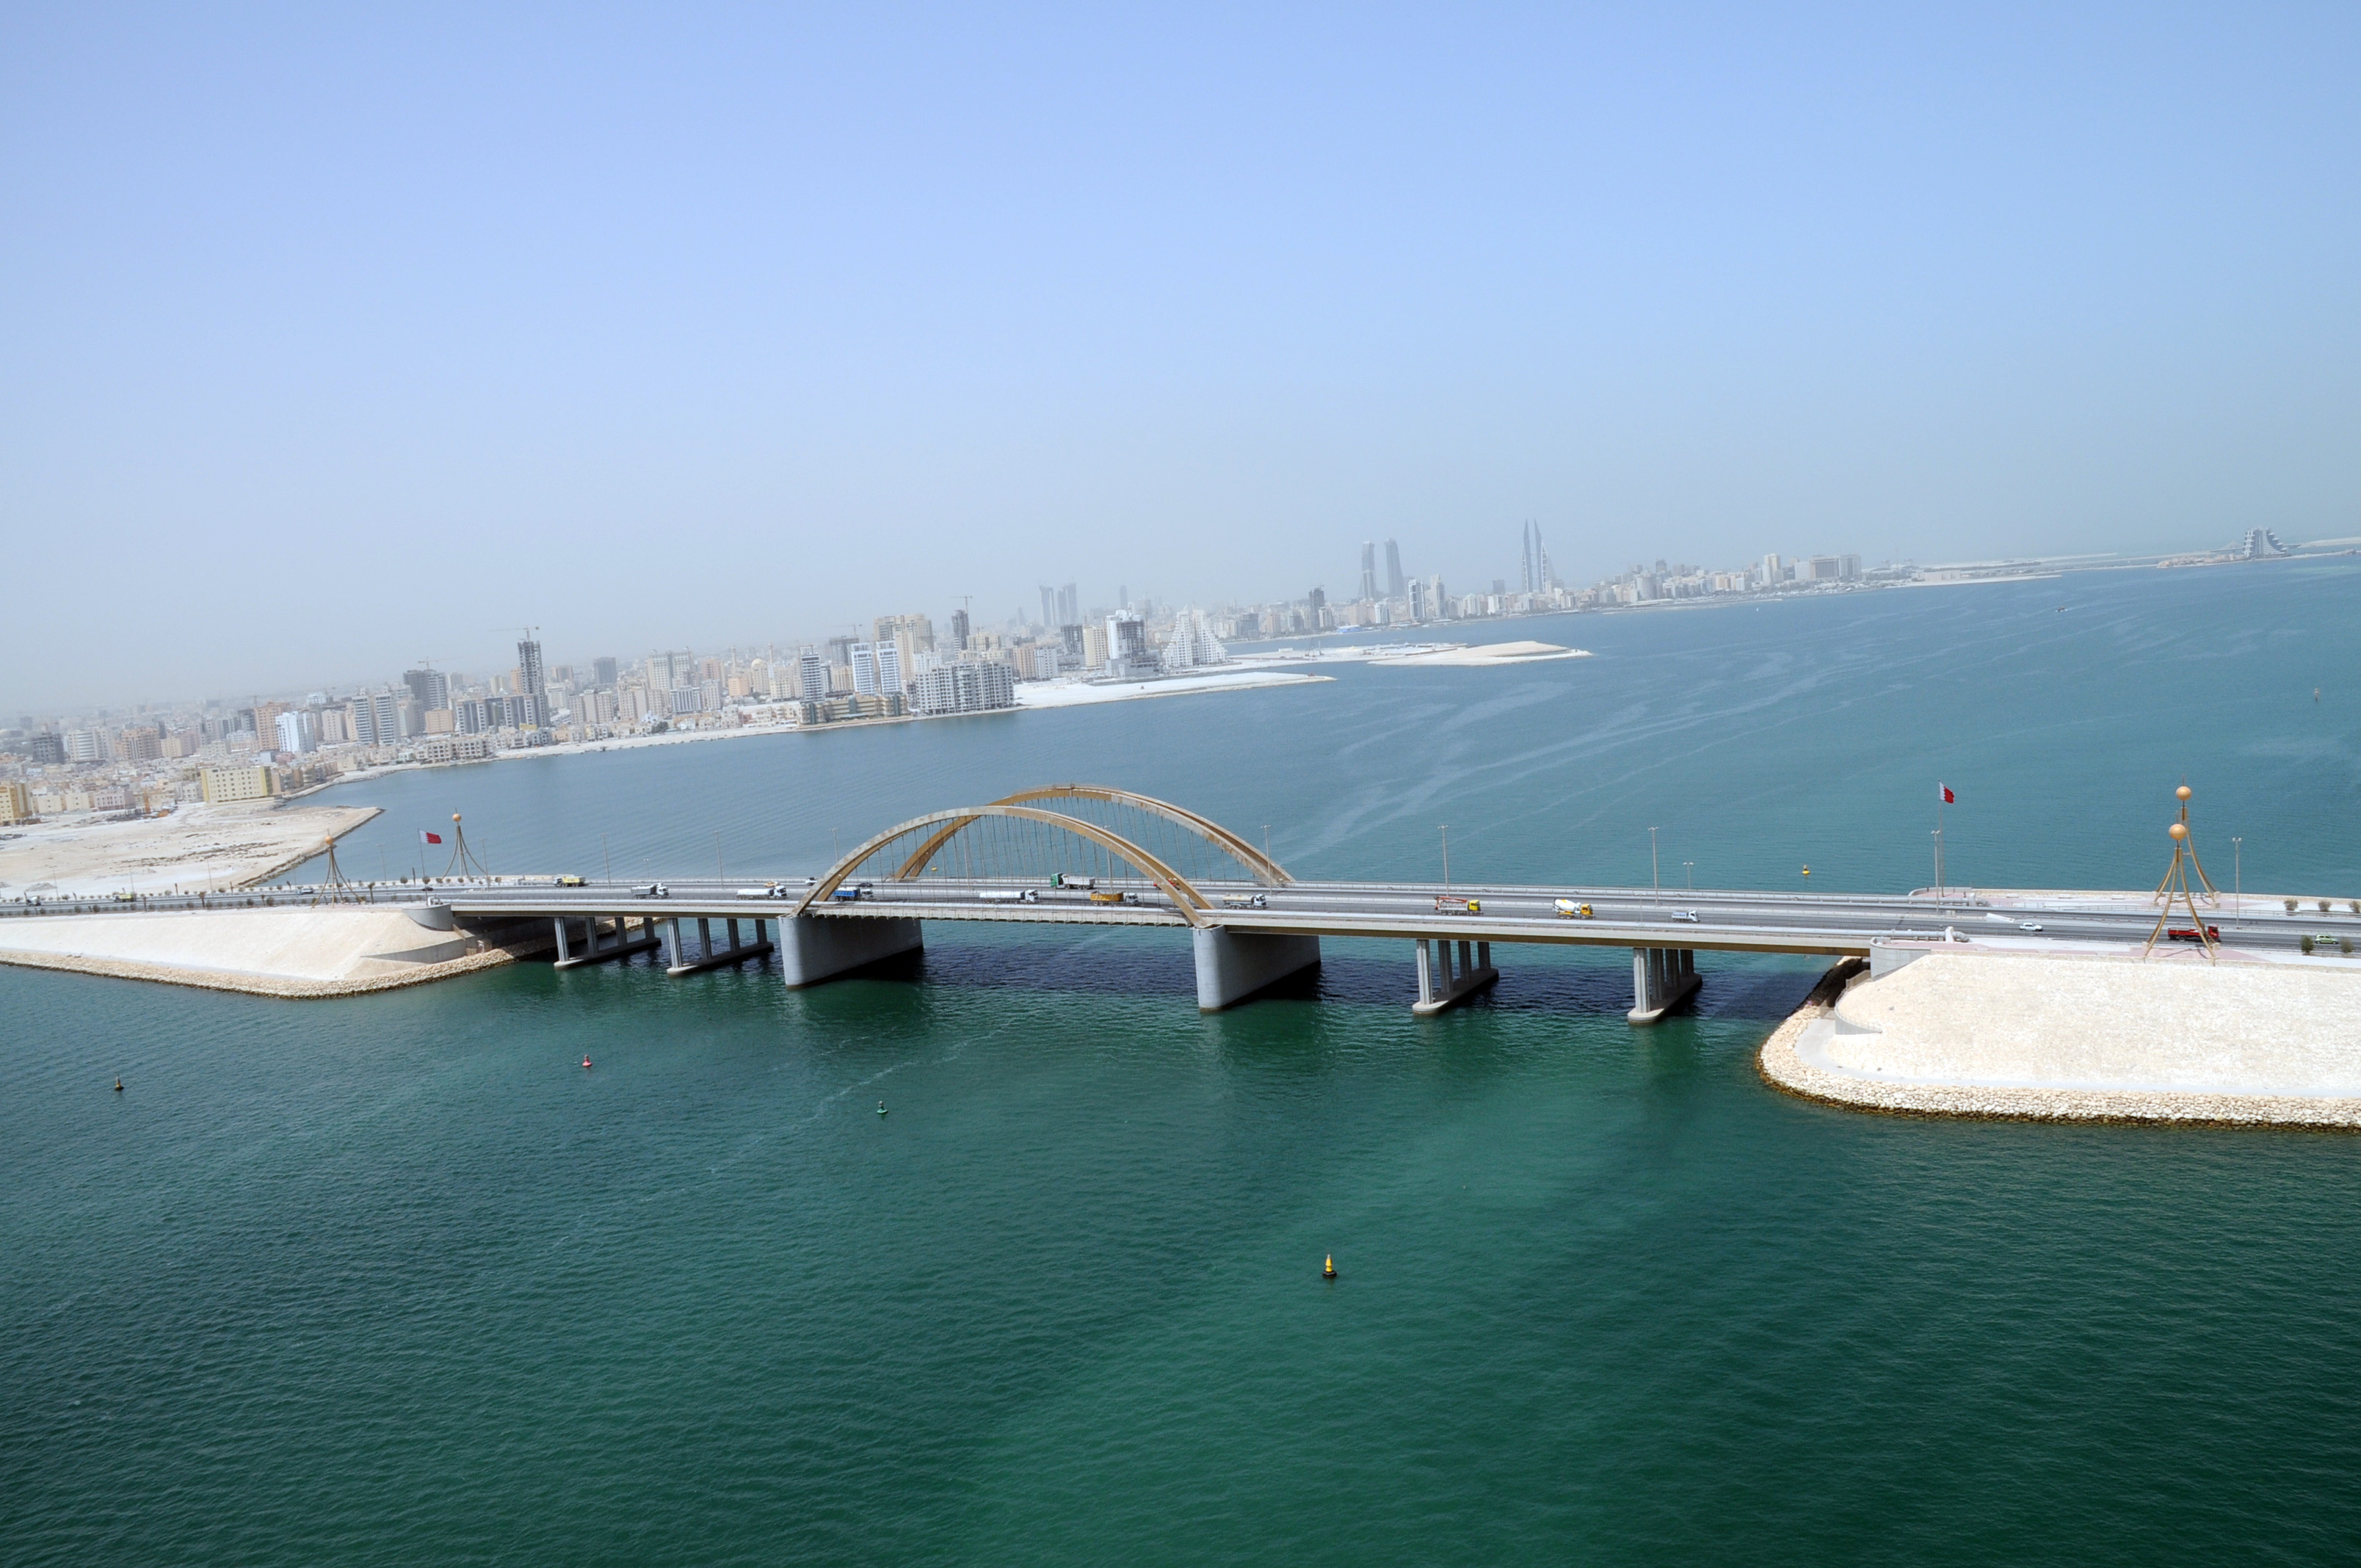 Bahrain News Agency | Hot, partly cloudy weather on Friday